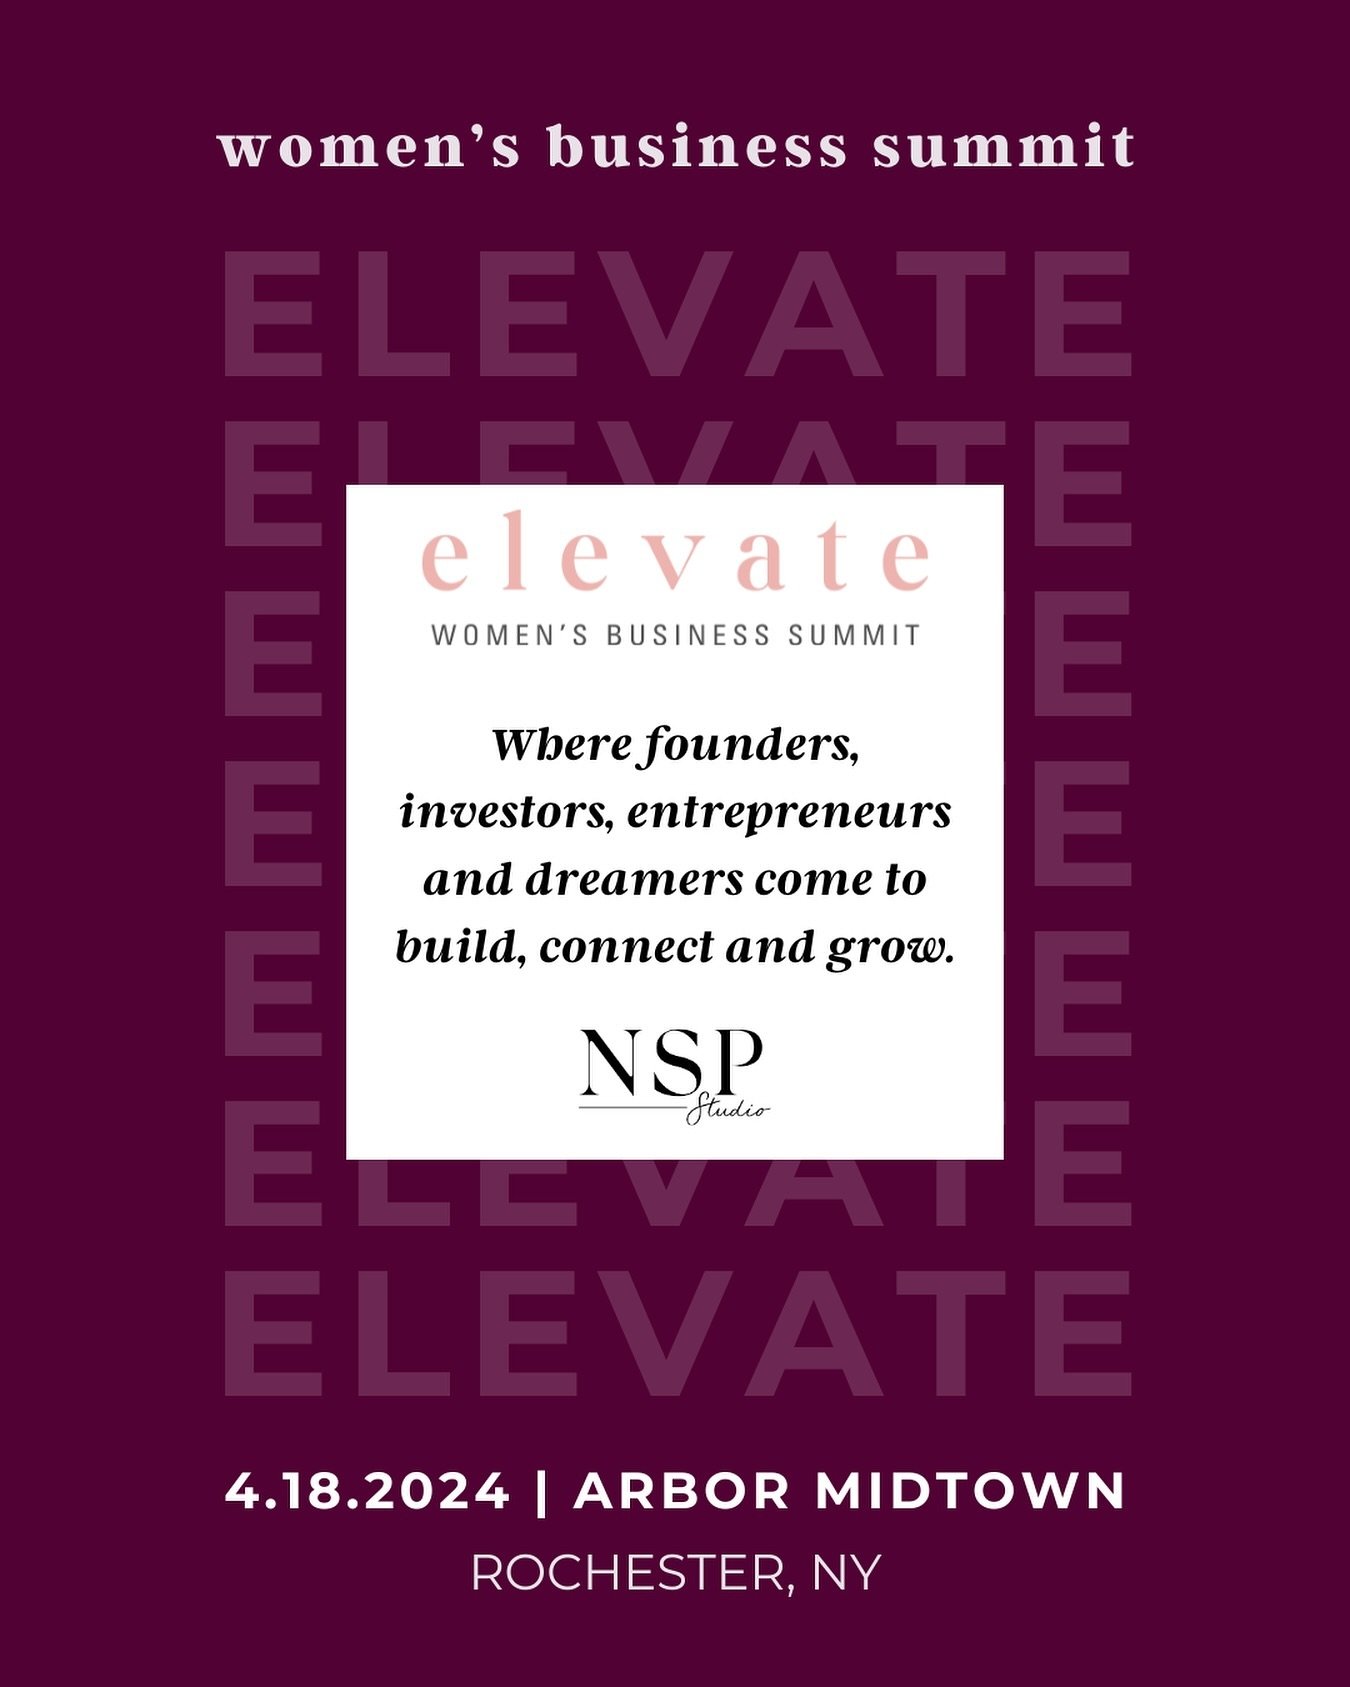 Don&rsquo;t miss your chance to get in on the event of the year for women in business right here in Rochester, NY &ndash; @elevatewomenssummit 🙌💥

We are less than two weeks out from this all-day event designed to bring female founders, investors a